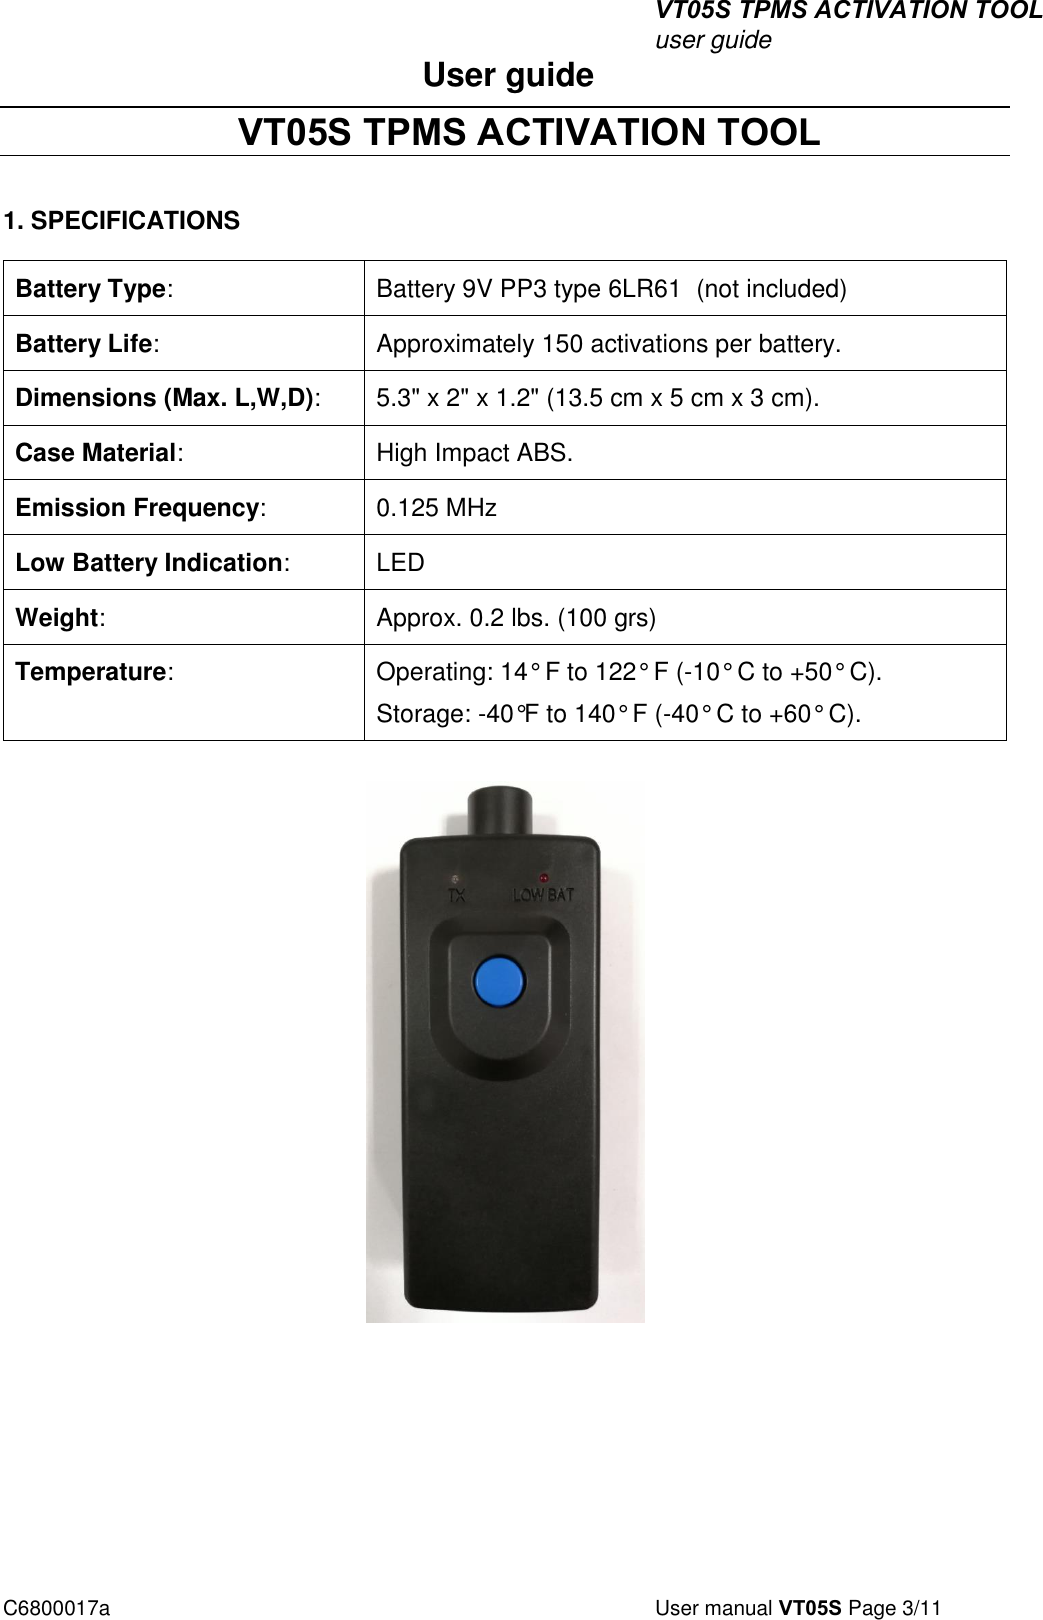 VT05S TPMS ACTIVATION TOOL user guide C6800017a  User manual VT05S Page 3/11 User guide  VT05S TPMS ACTIVATION TOOL 1. SPECIFICATIONSBattery Type: Battery 9V PP3 type 6LR61  (not included) Battery Life: Approximately 150 activations per battery. Dimensions (Max. L,W,D): 5.3&quot; x 2&quot; x 1.2&quot; (13.5 cm x 5 cm x 3 cm). Case Material: High Impact ABS. Emission Frequency: 0.125 MHz Low Battery Indication: LED Weight: Approx. 0.2 lbs. (100 grs) Temperature: Operating: 14° F to 122° F (-10° C to +50° C). Storage: -40°F to 140° F (-40° C to +60° C). 